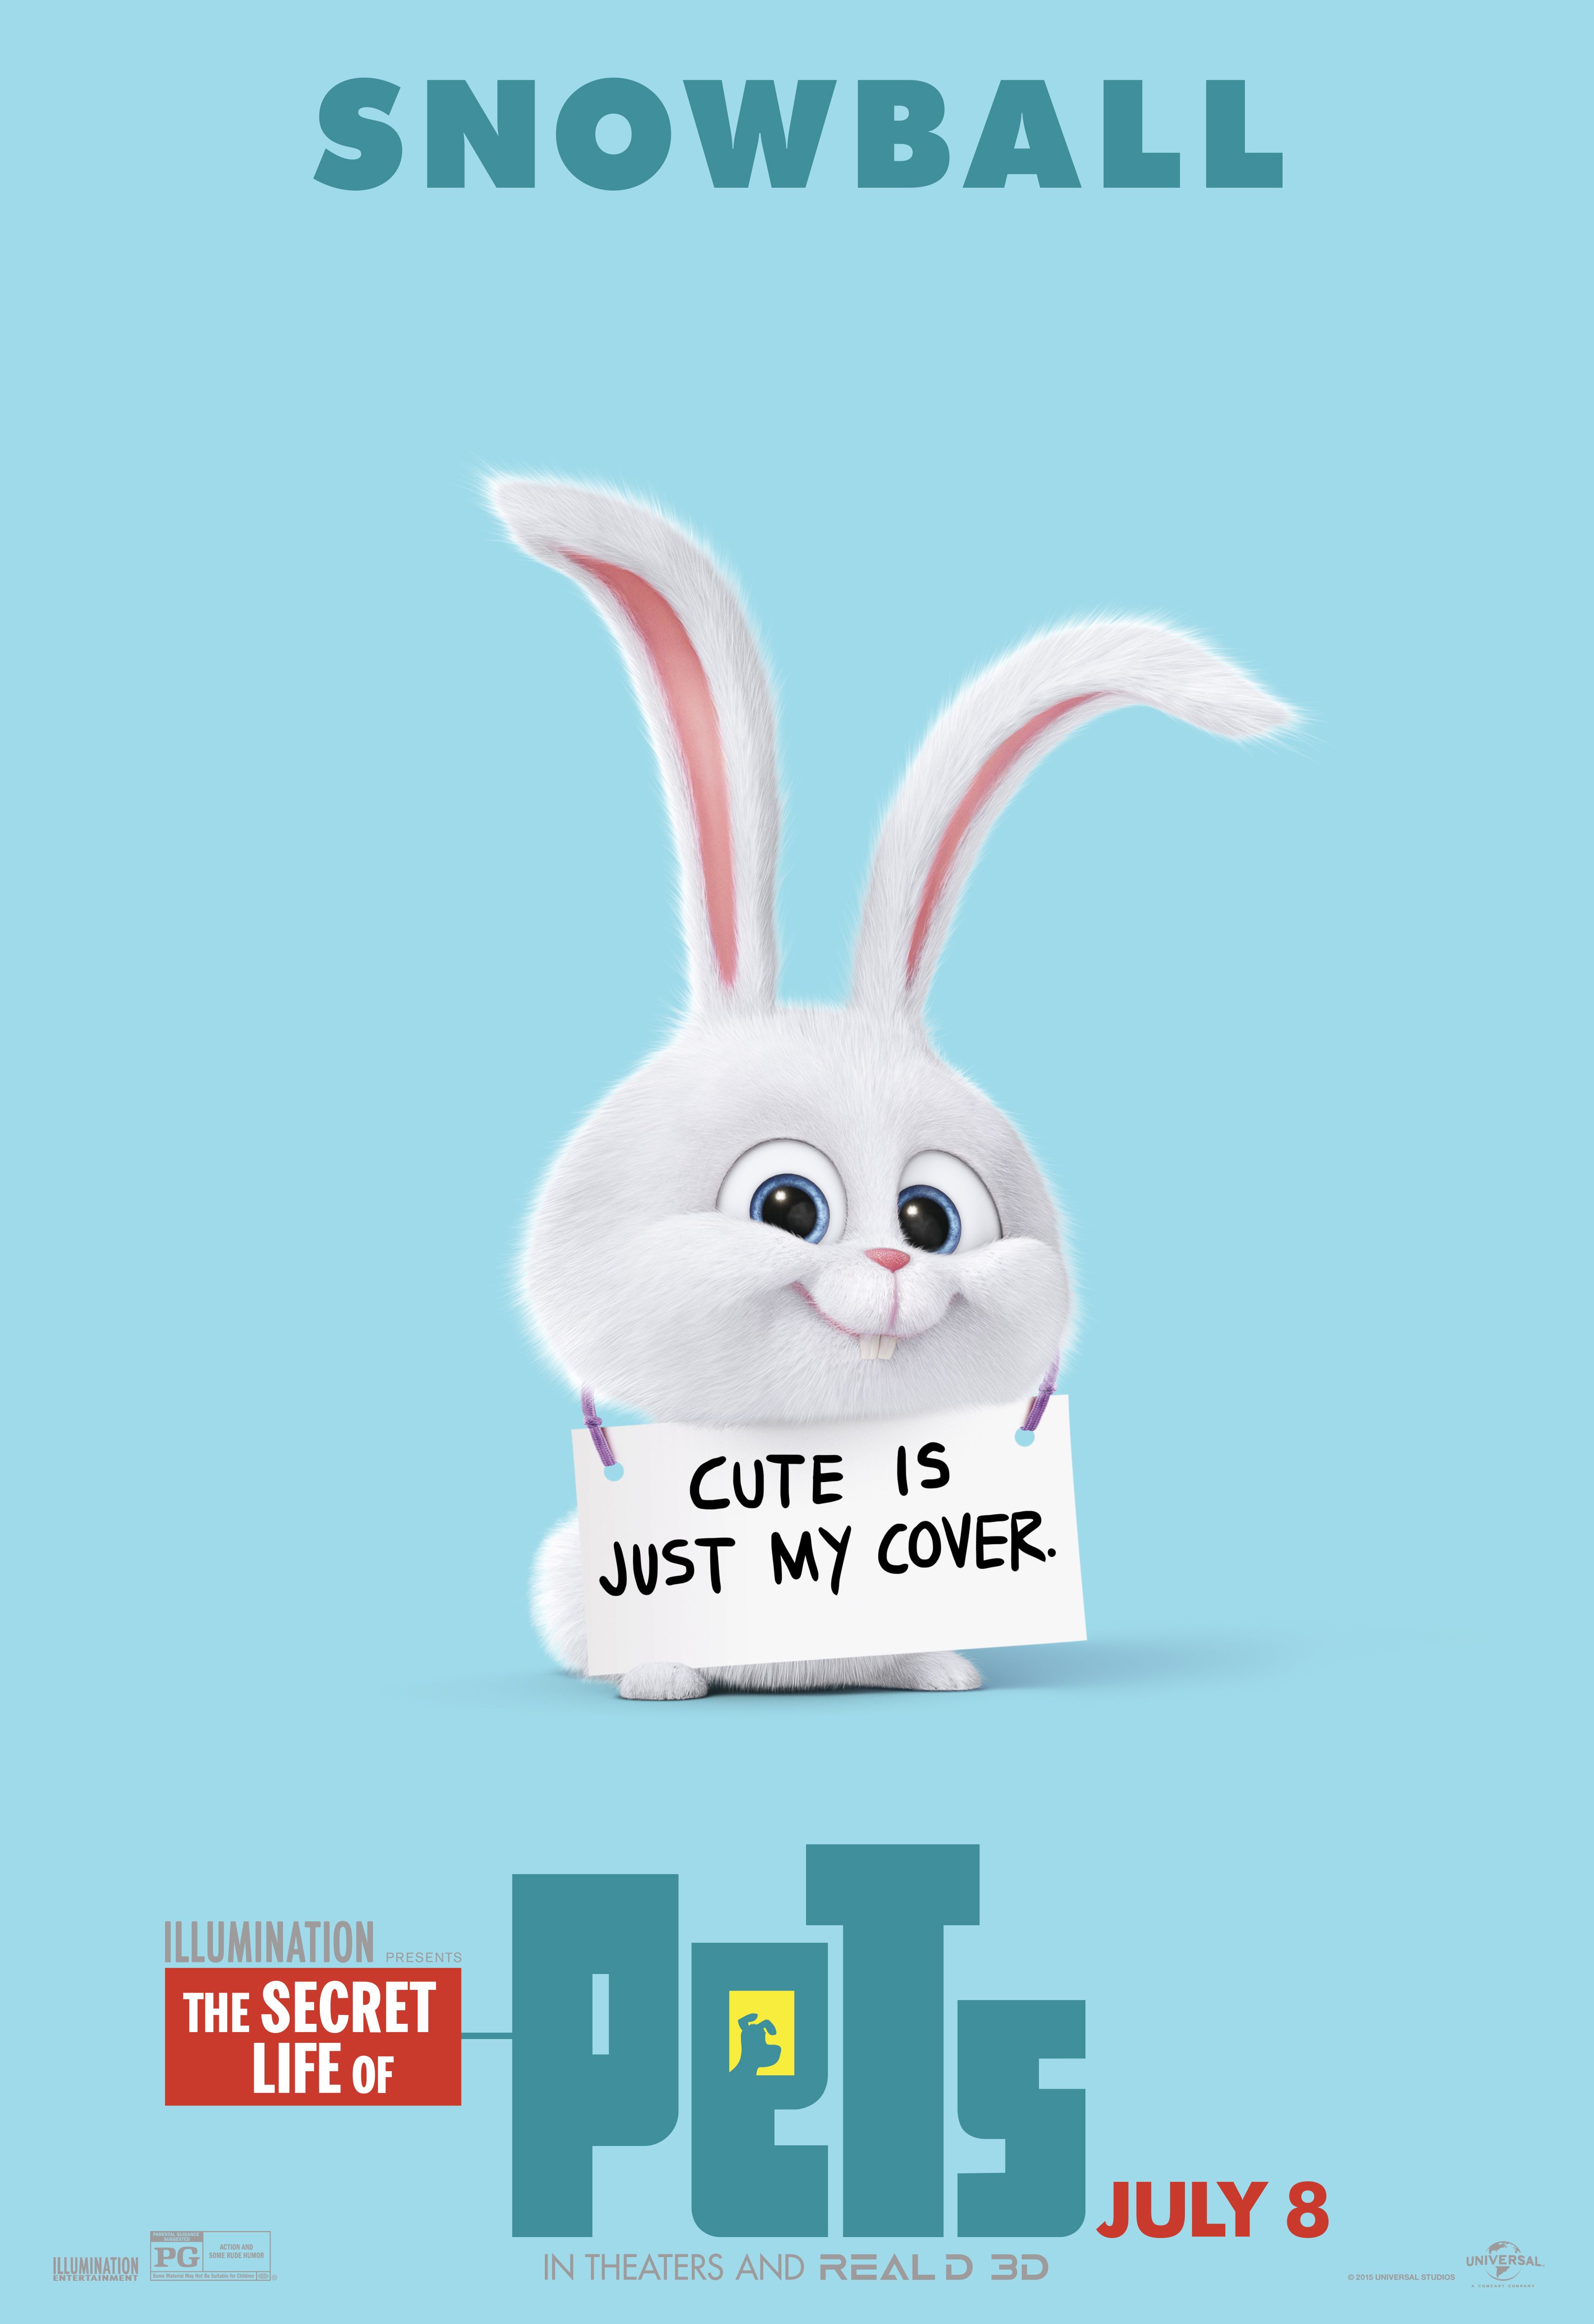 Snowball the little white bunny is so cute it kills. The Secret Life of Pets. In Theaters July 8. Pets movie, Secret life, Secret life of pets